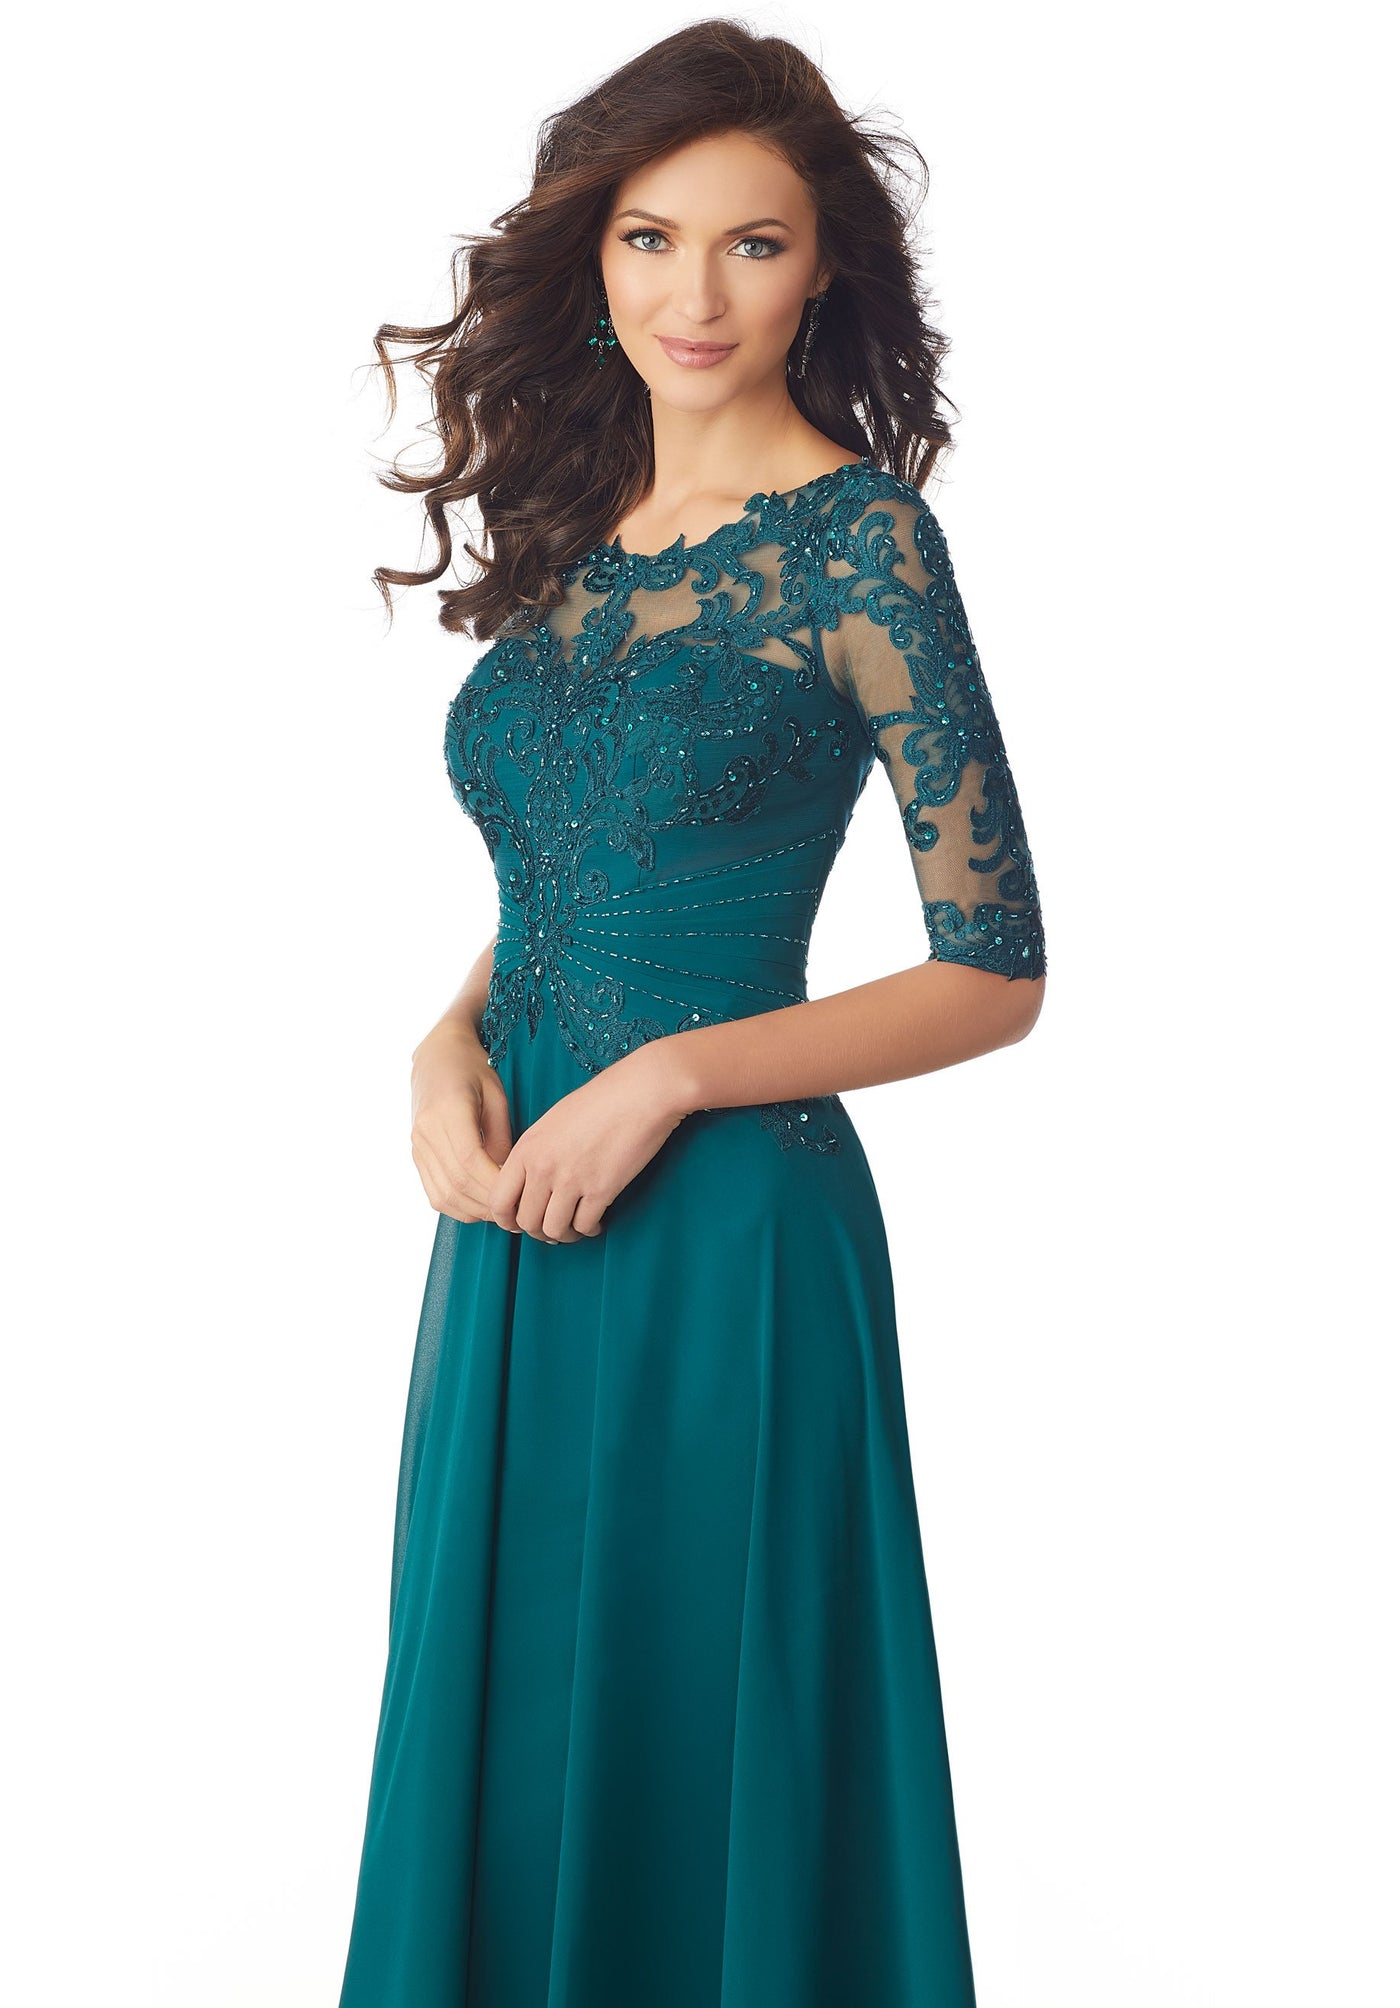 MGNY By Mori Lee - 71812 Beaded Embroidered Bateau Dress In Green